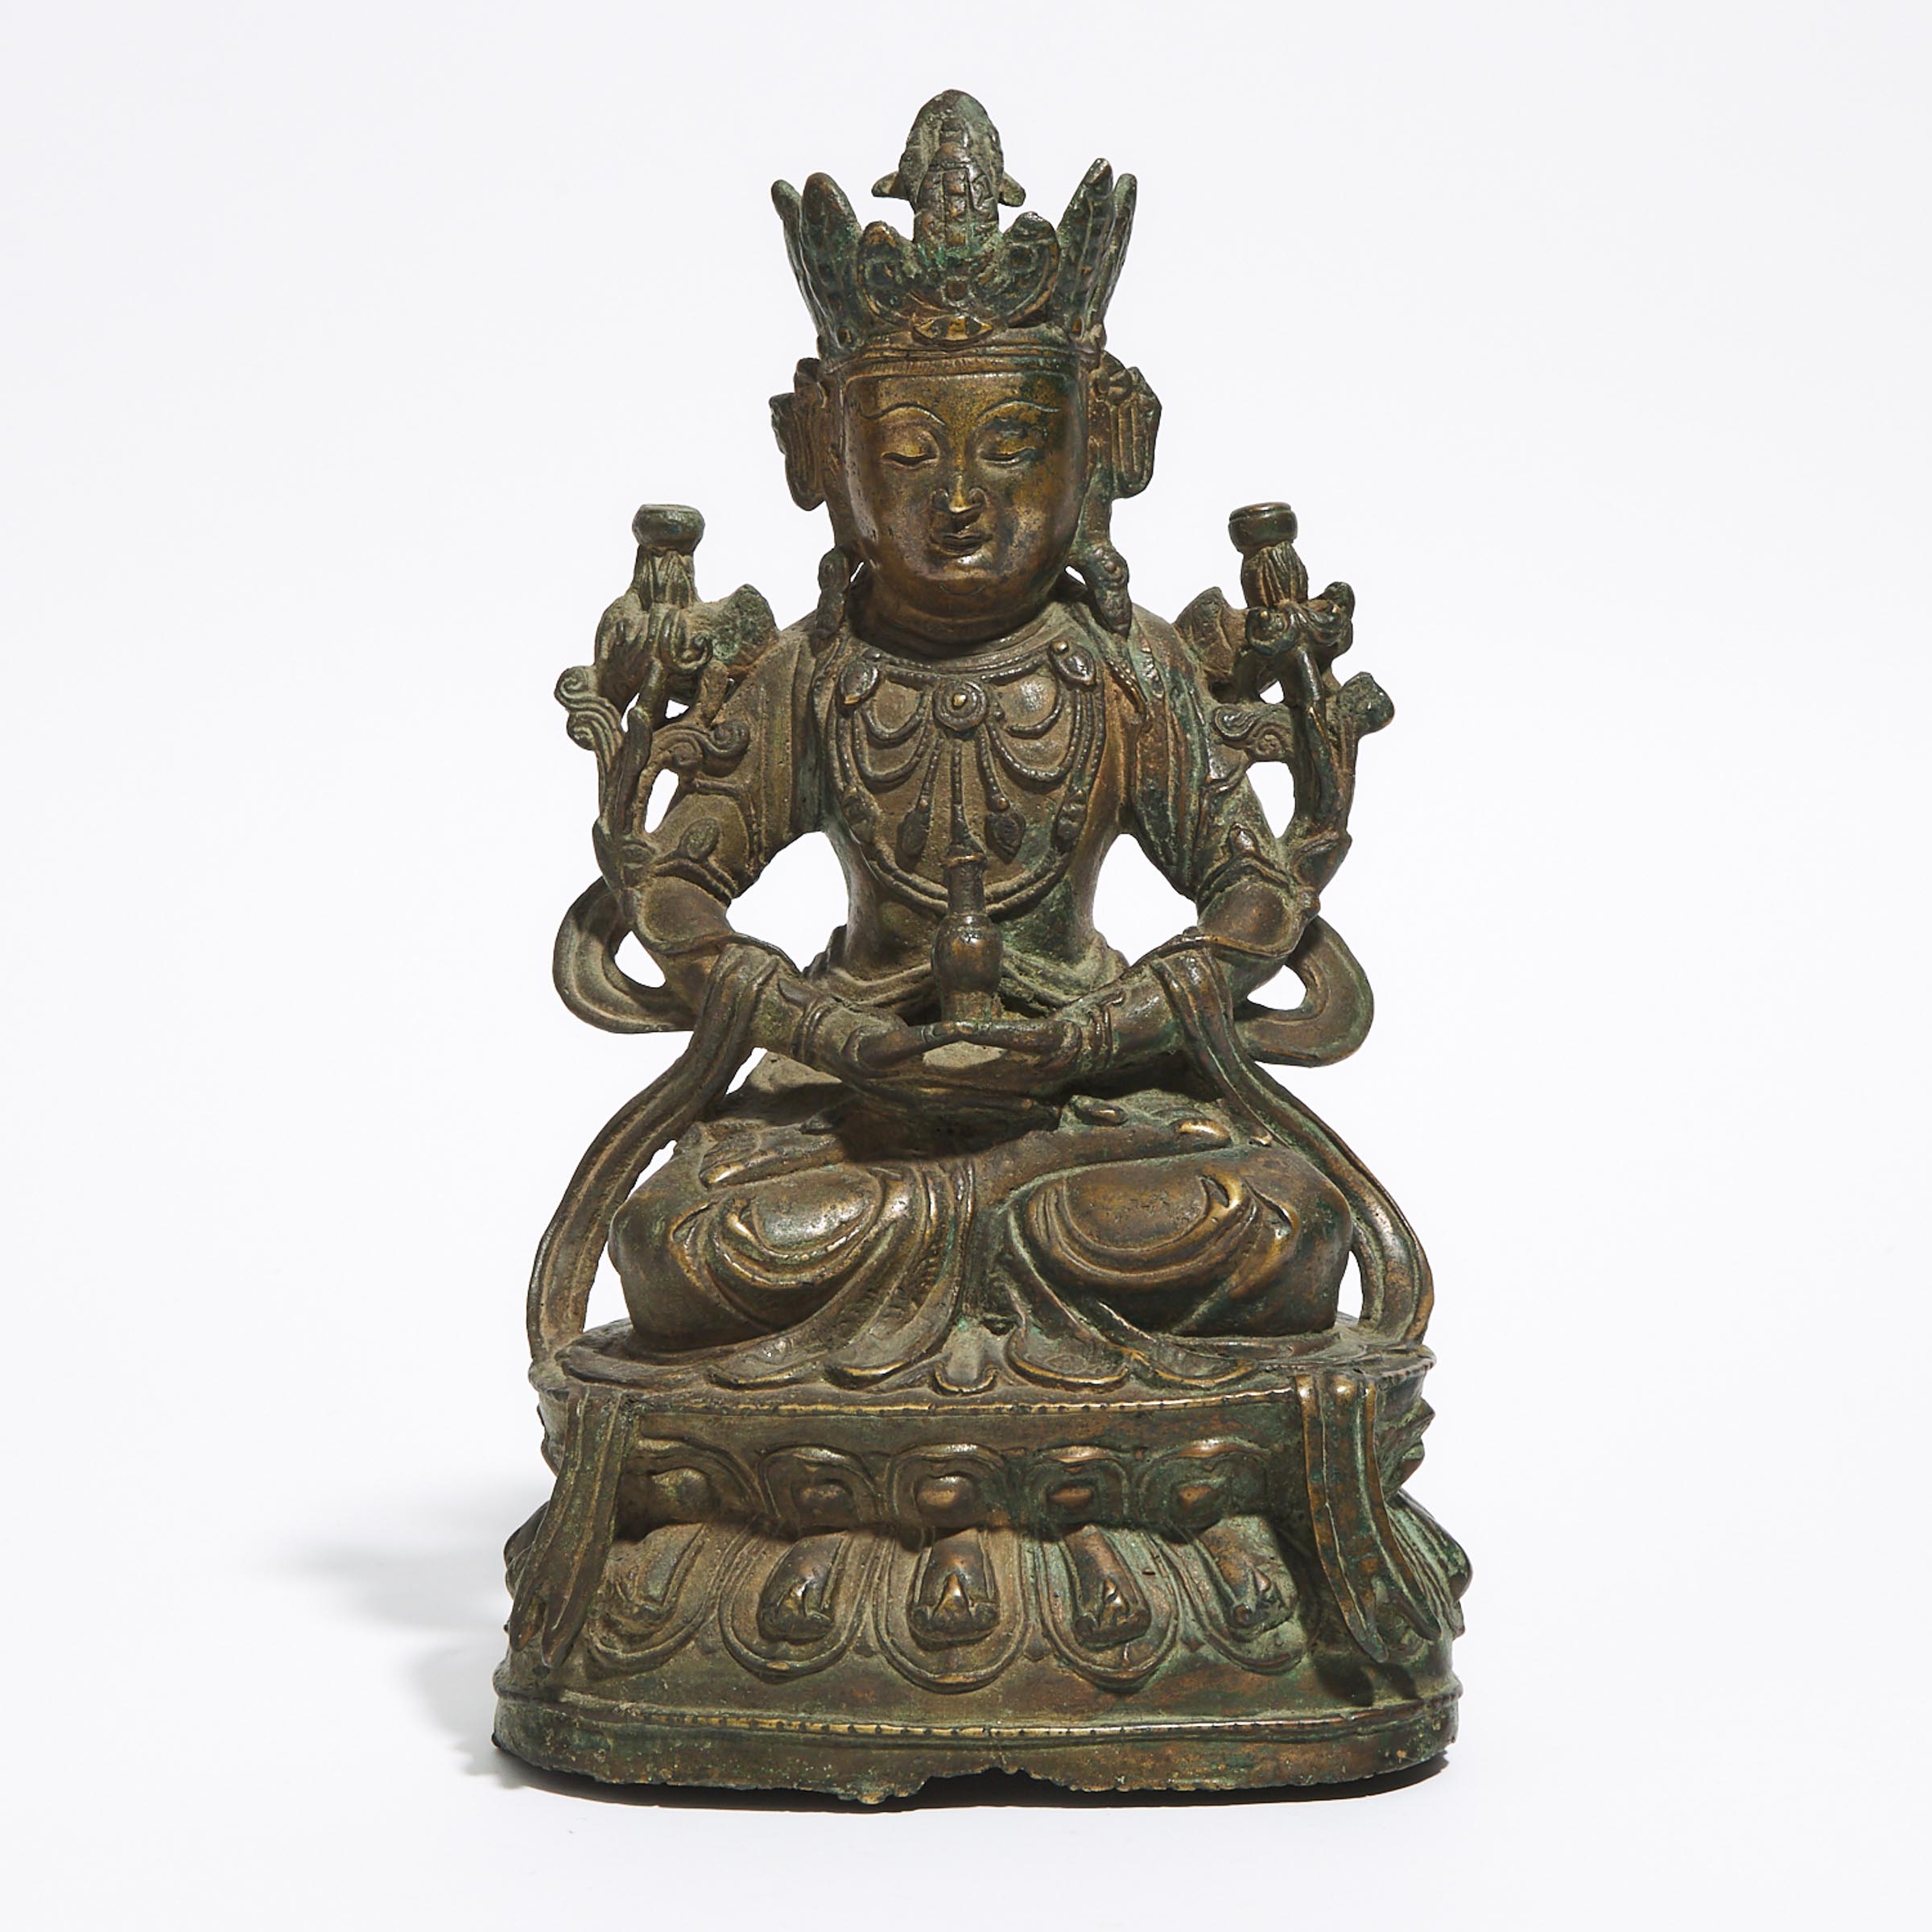 A Bronze Figure of a Seated Bodhisattva, Ming Dynasty, Late 16th Century